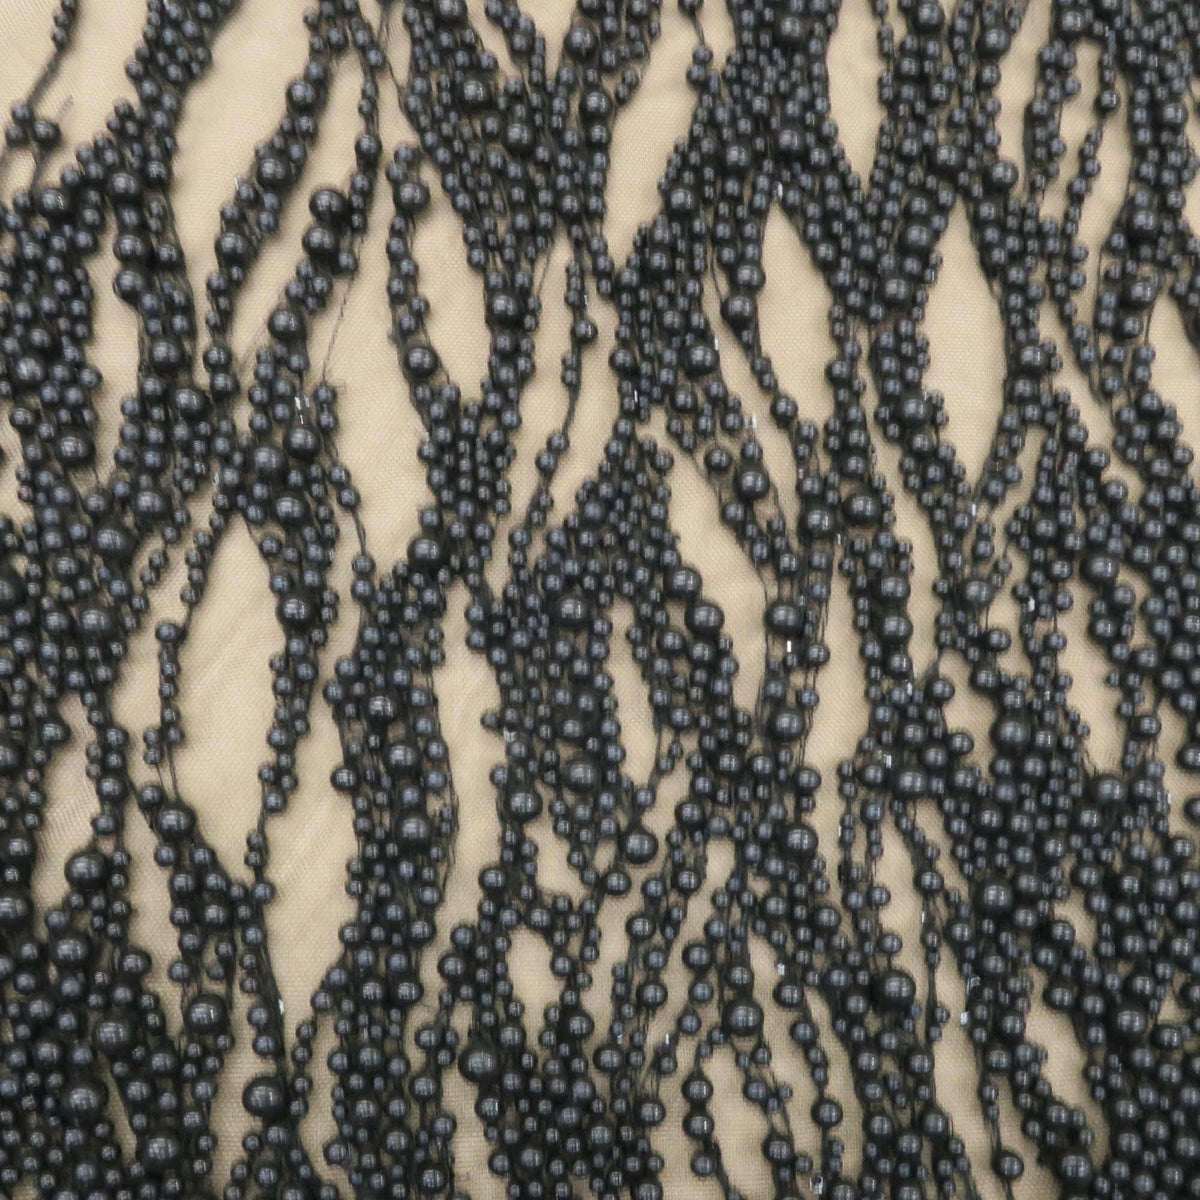 Black Pearls Lace Beaded Fabric on Tulle for Bridal Fabric